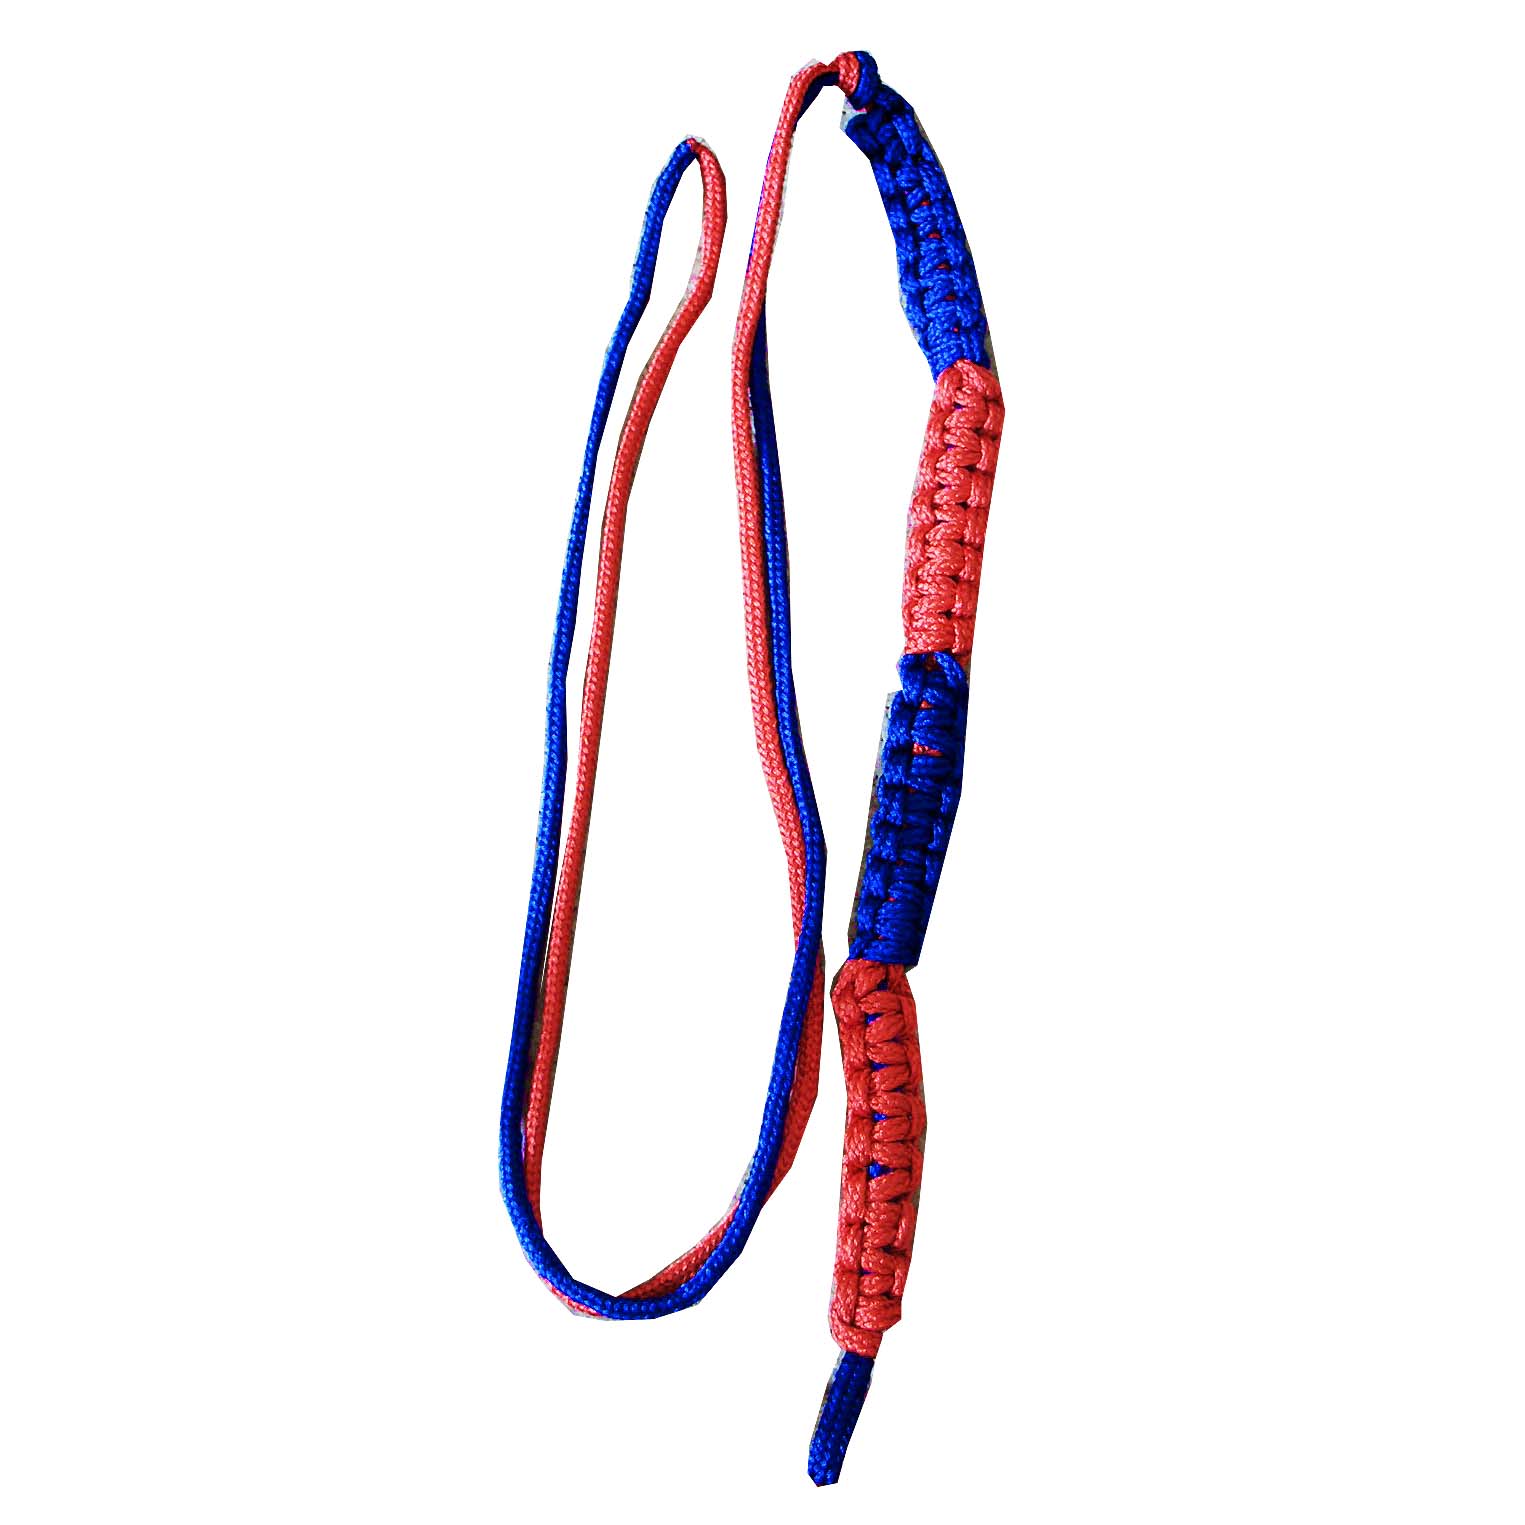 Border crossing point warrior Blue & Red Aiguillette